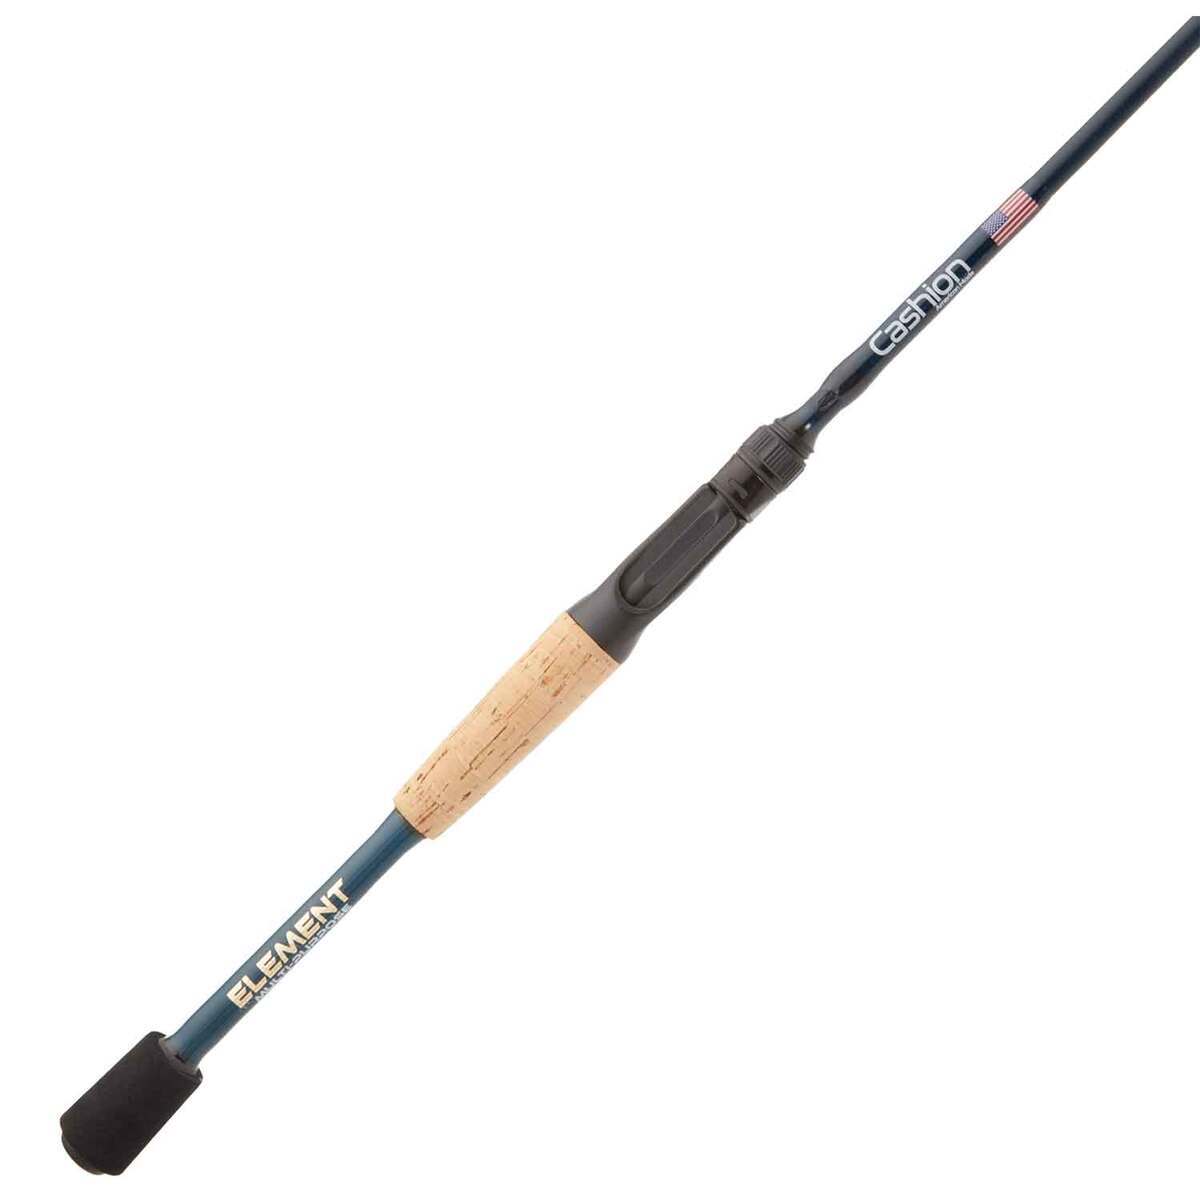 Cashion Fishing Rods Element Multi-Purpose Casting Rod - 7ft 1in